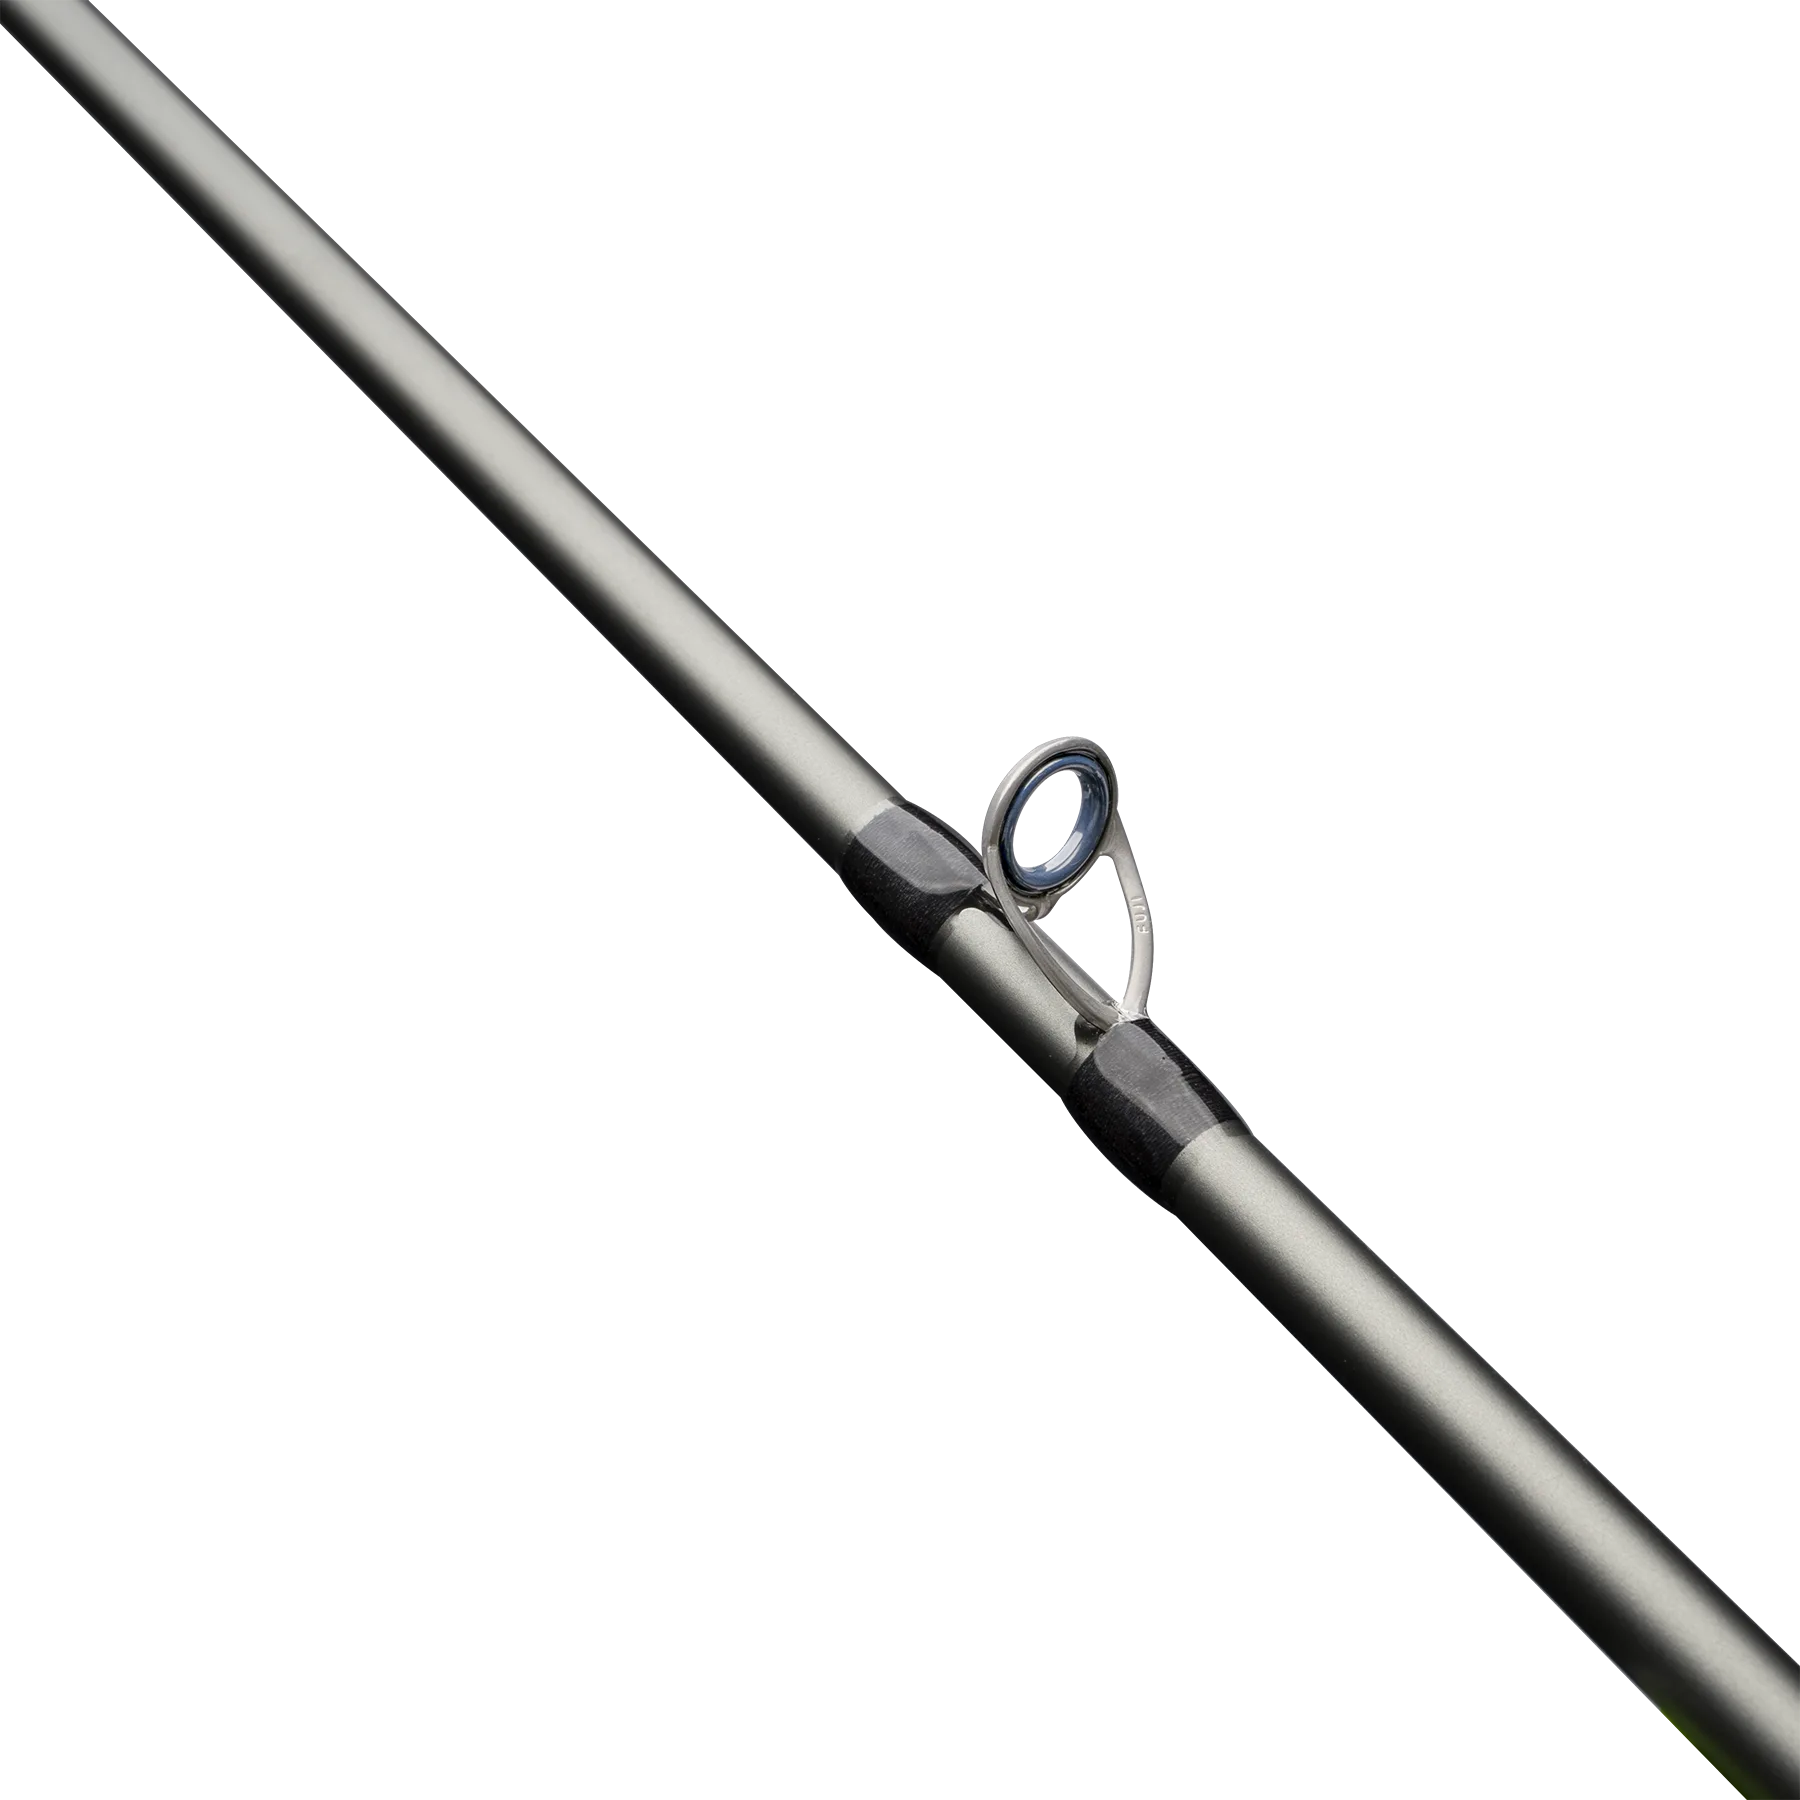 T-ZACK Spinning Fishing Rod, 7'2'' Medium/Fast Action/One Piece